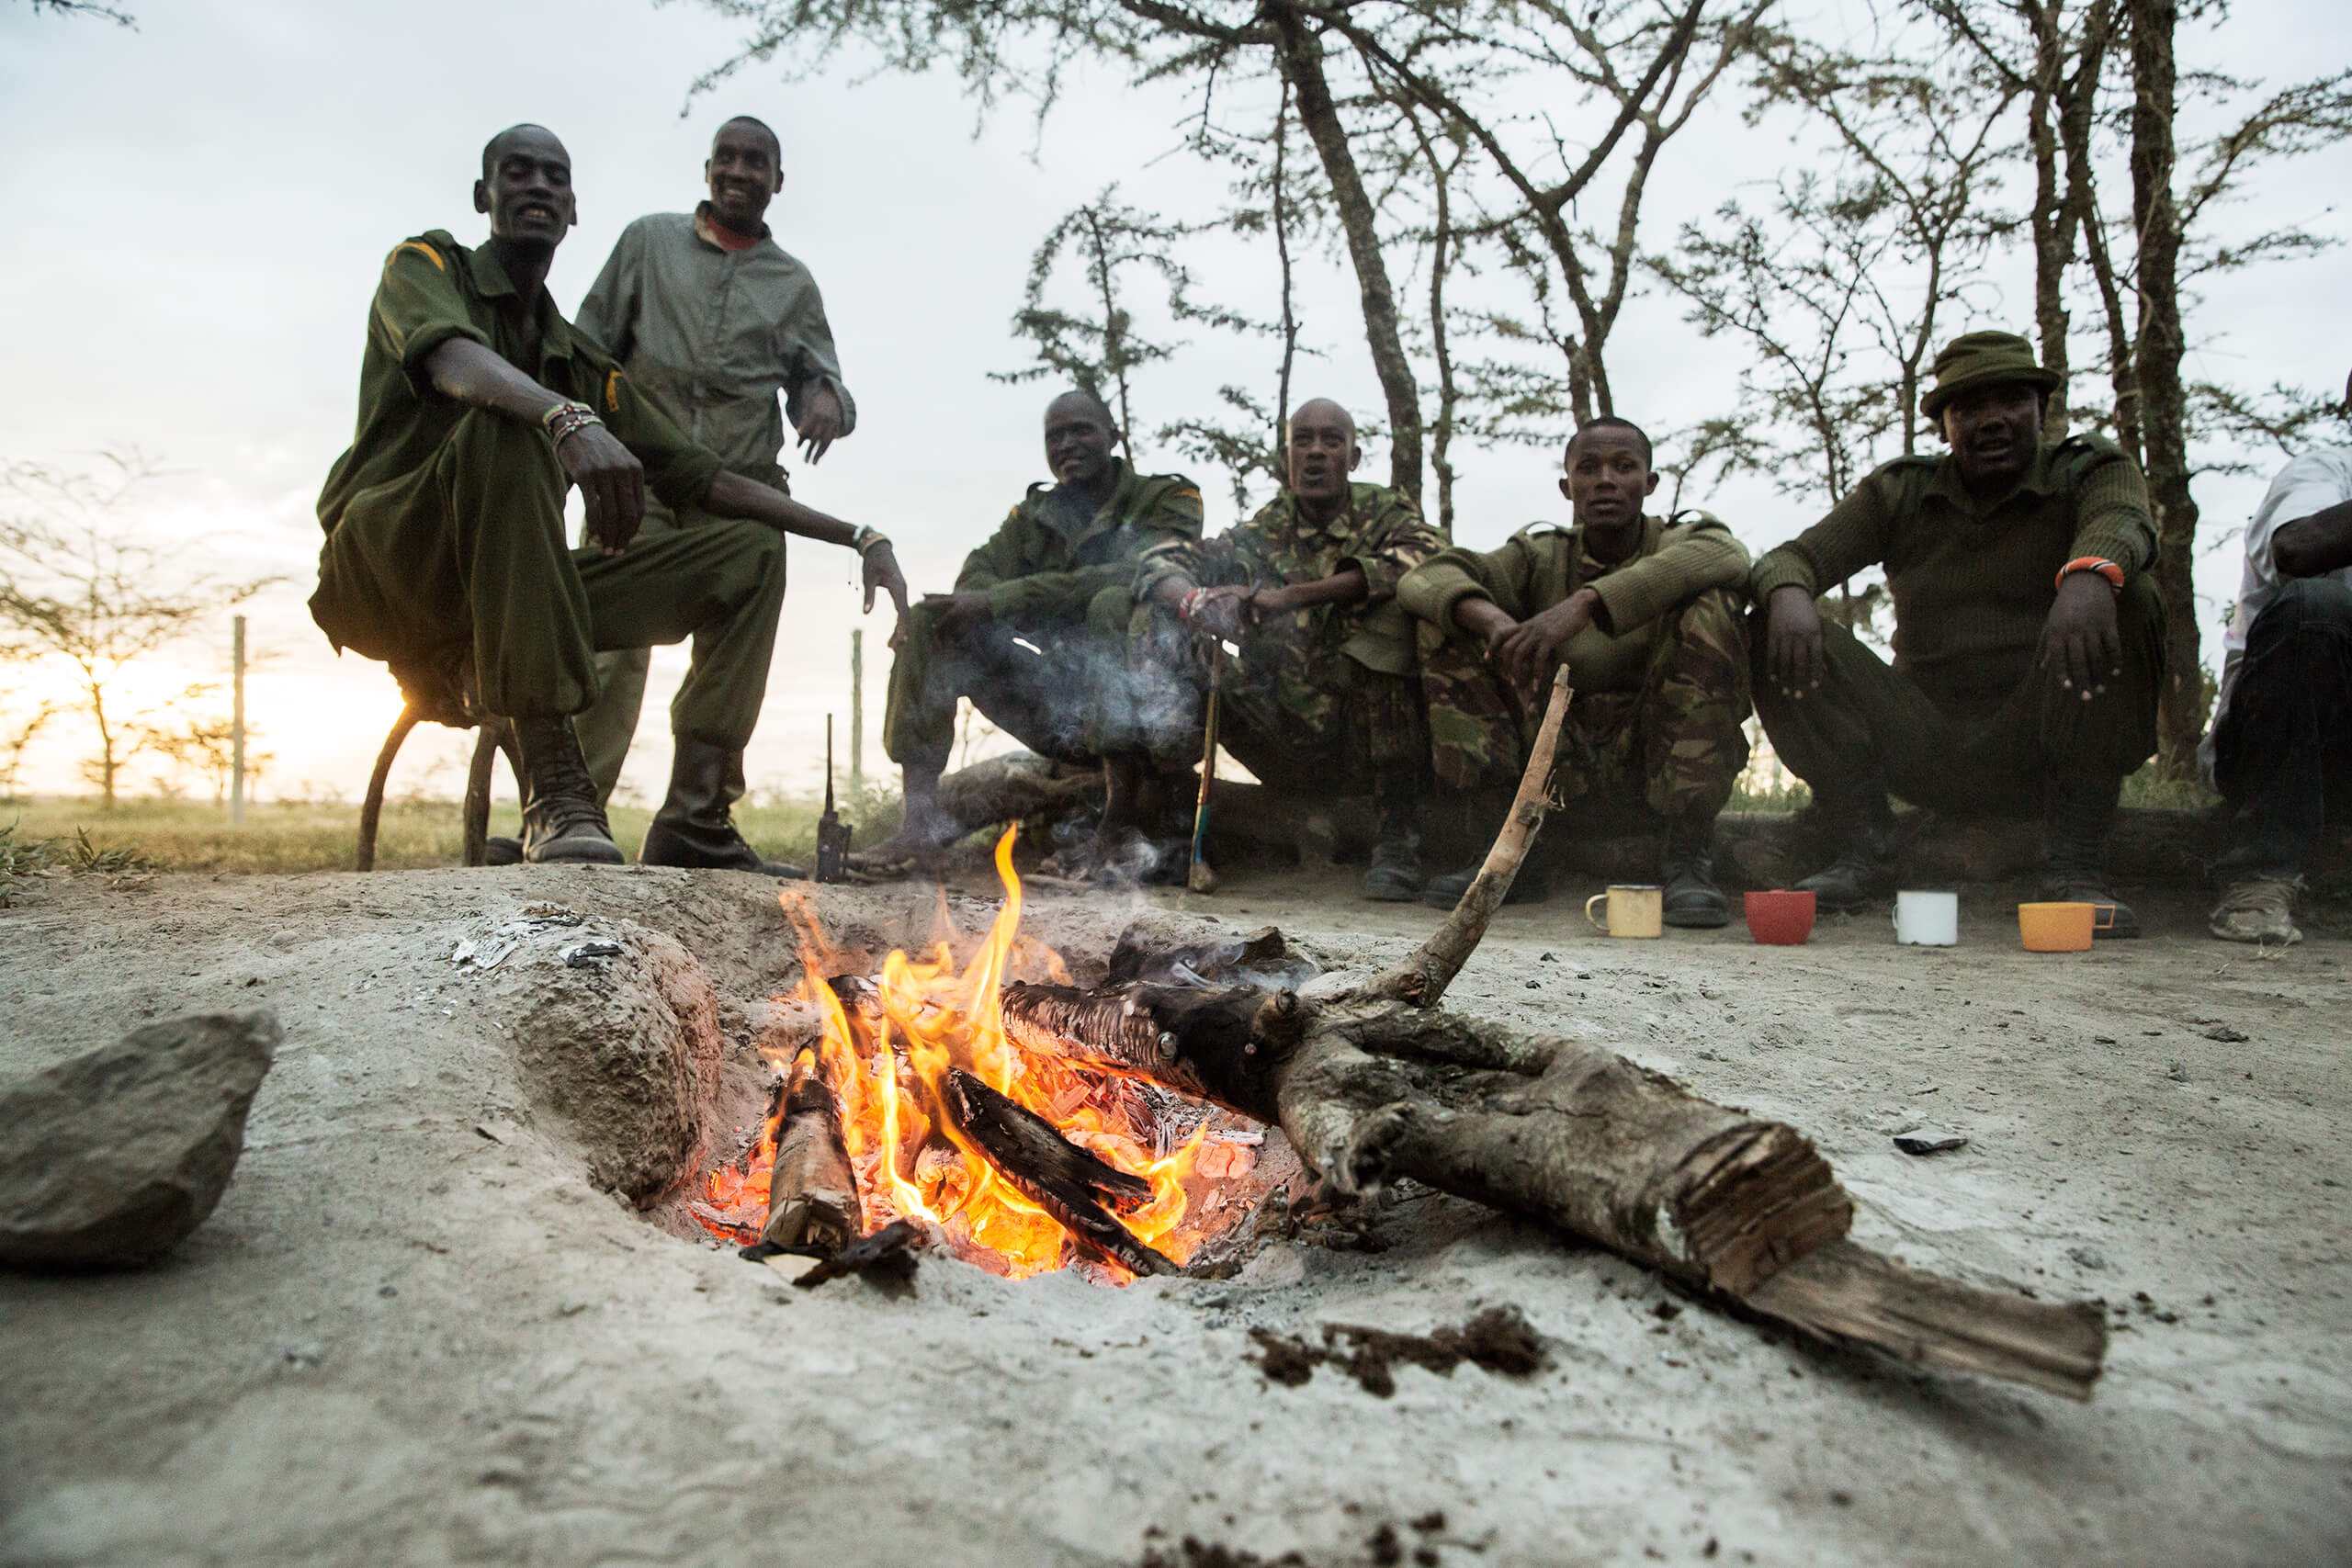 Caretakers and rangers at Ol Pejeta enjoy tea by the fire after the day shift.